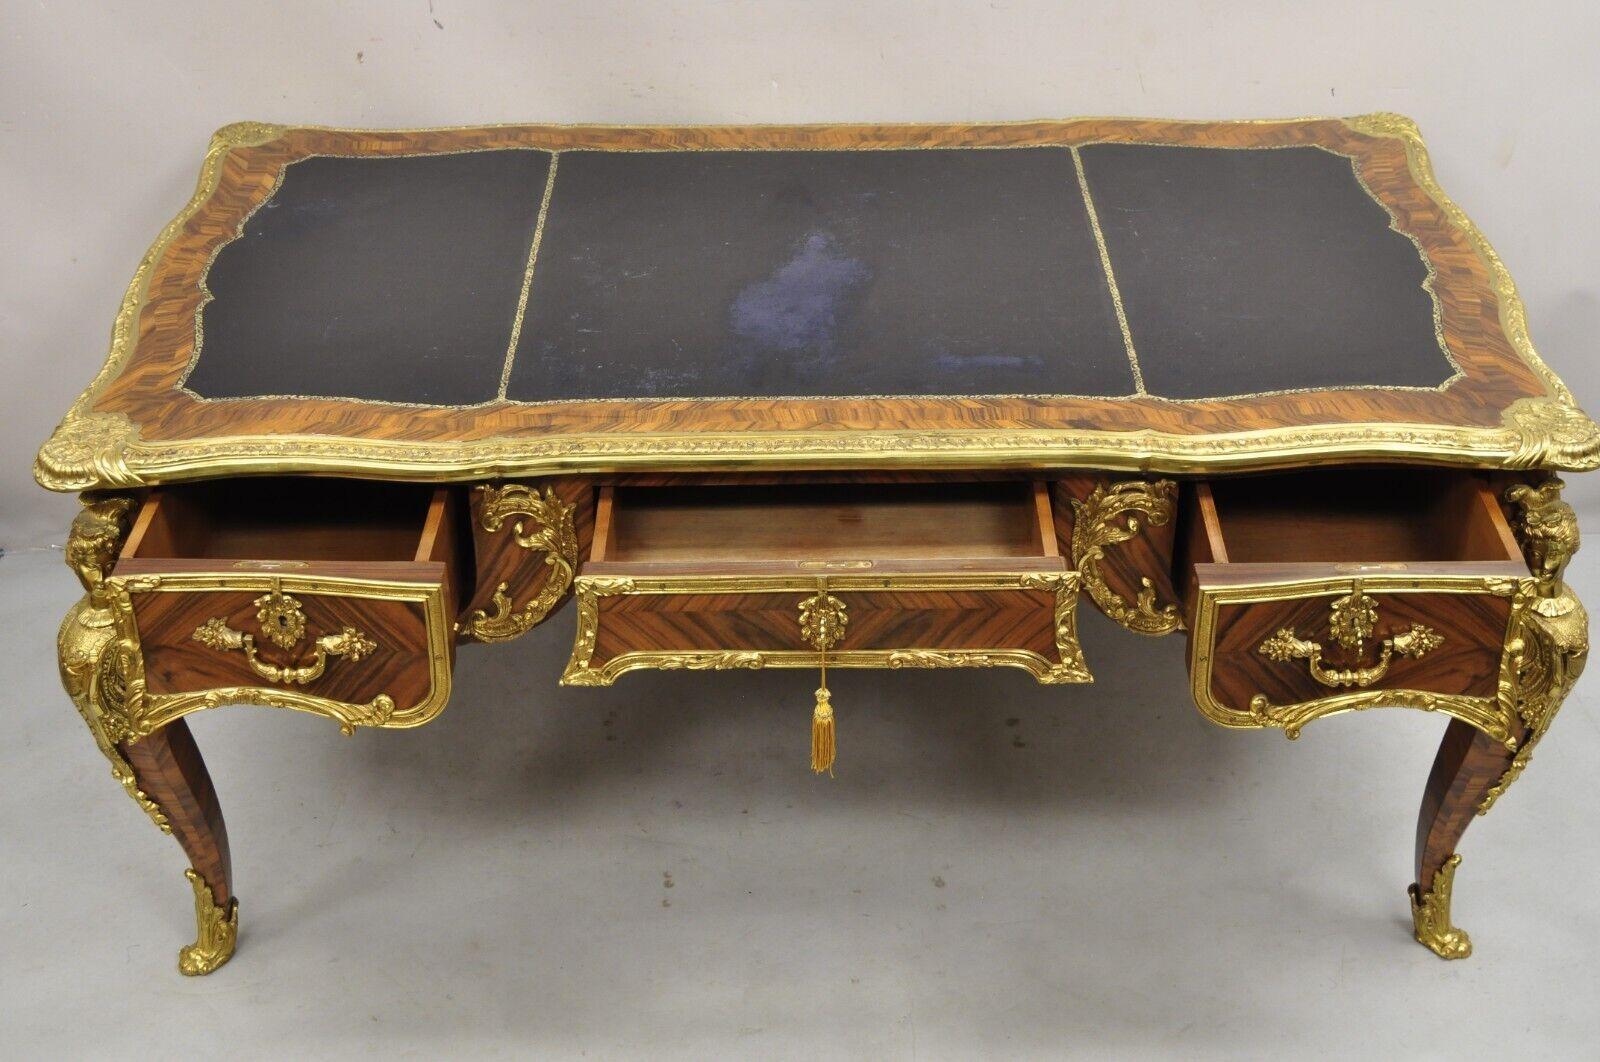 20th Century French Louis XV Style Figural Bronze Ormolu Leather Top Bureau Plat Writing Desk For Sale